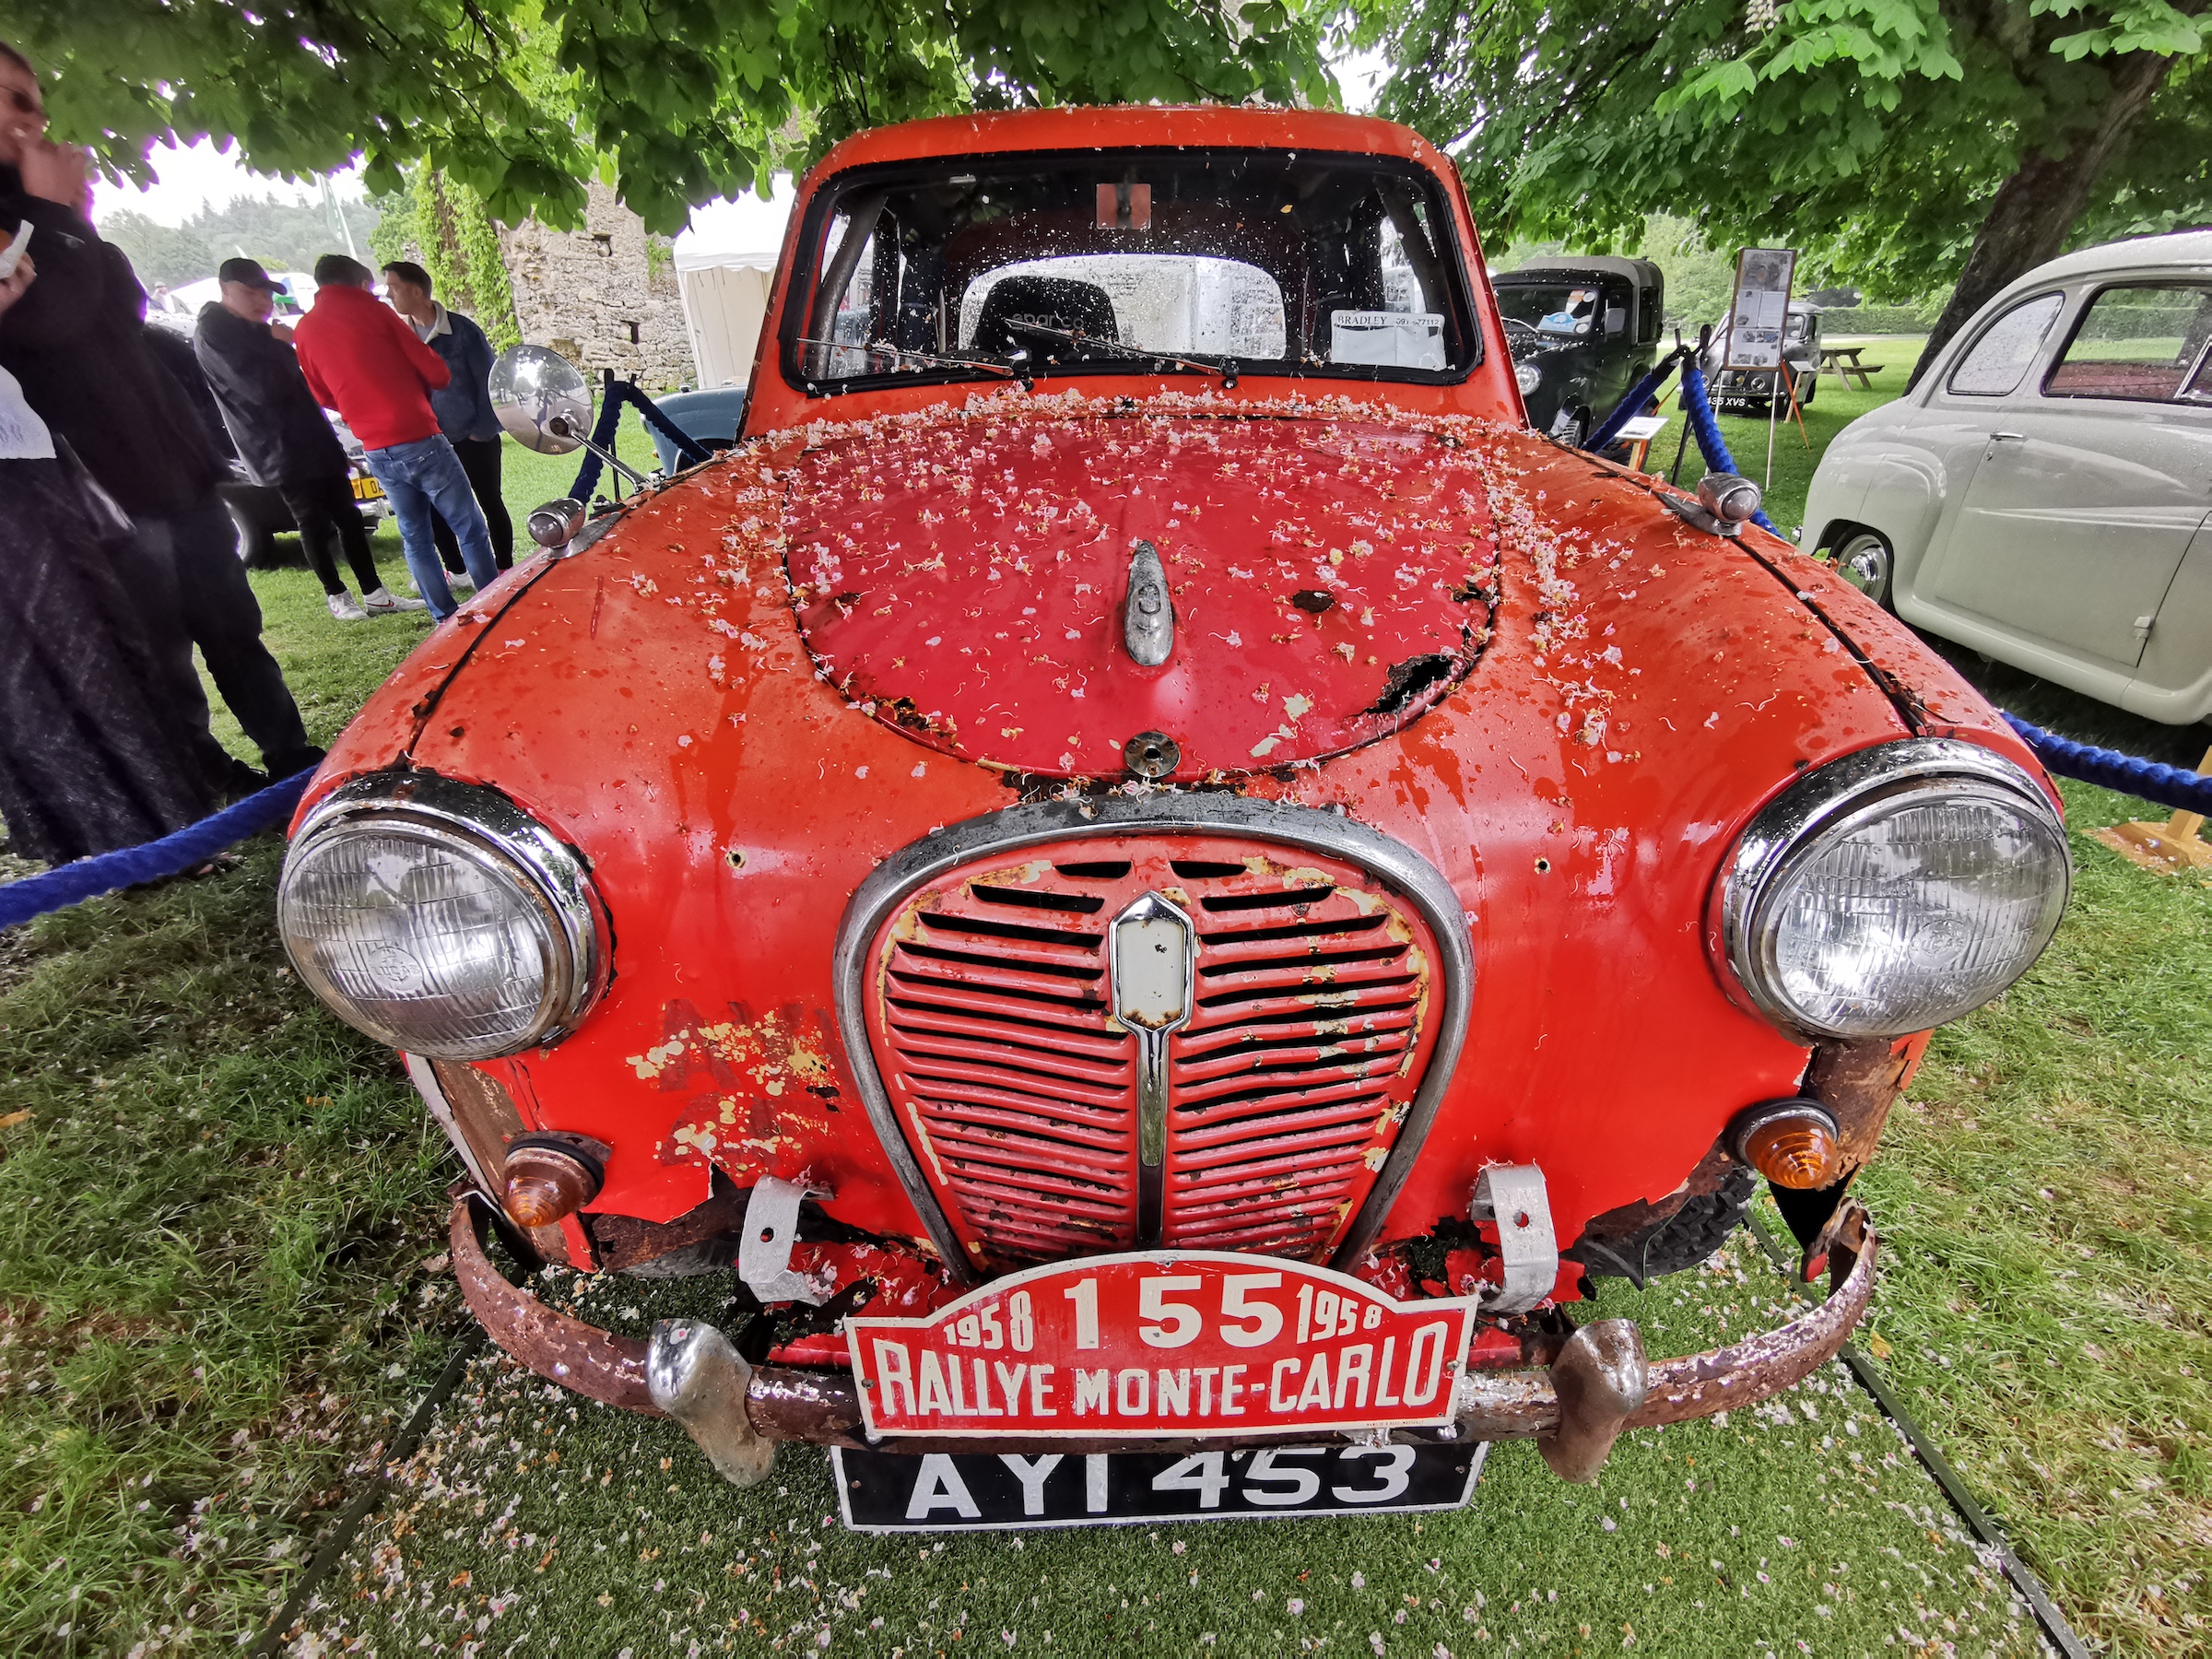 Rescued Monte Carlo Rally Austin A35 to tackle stages once again